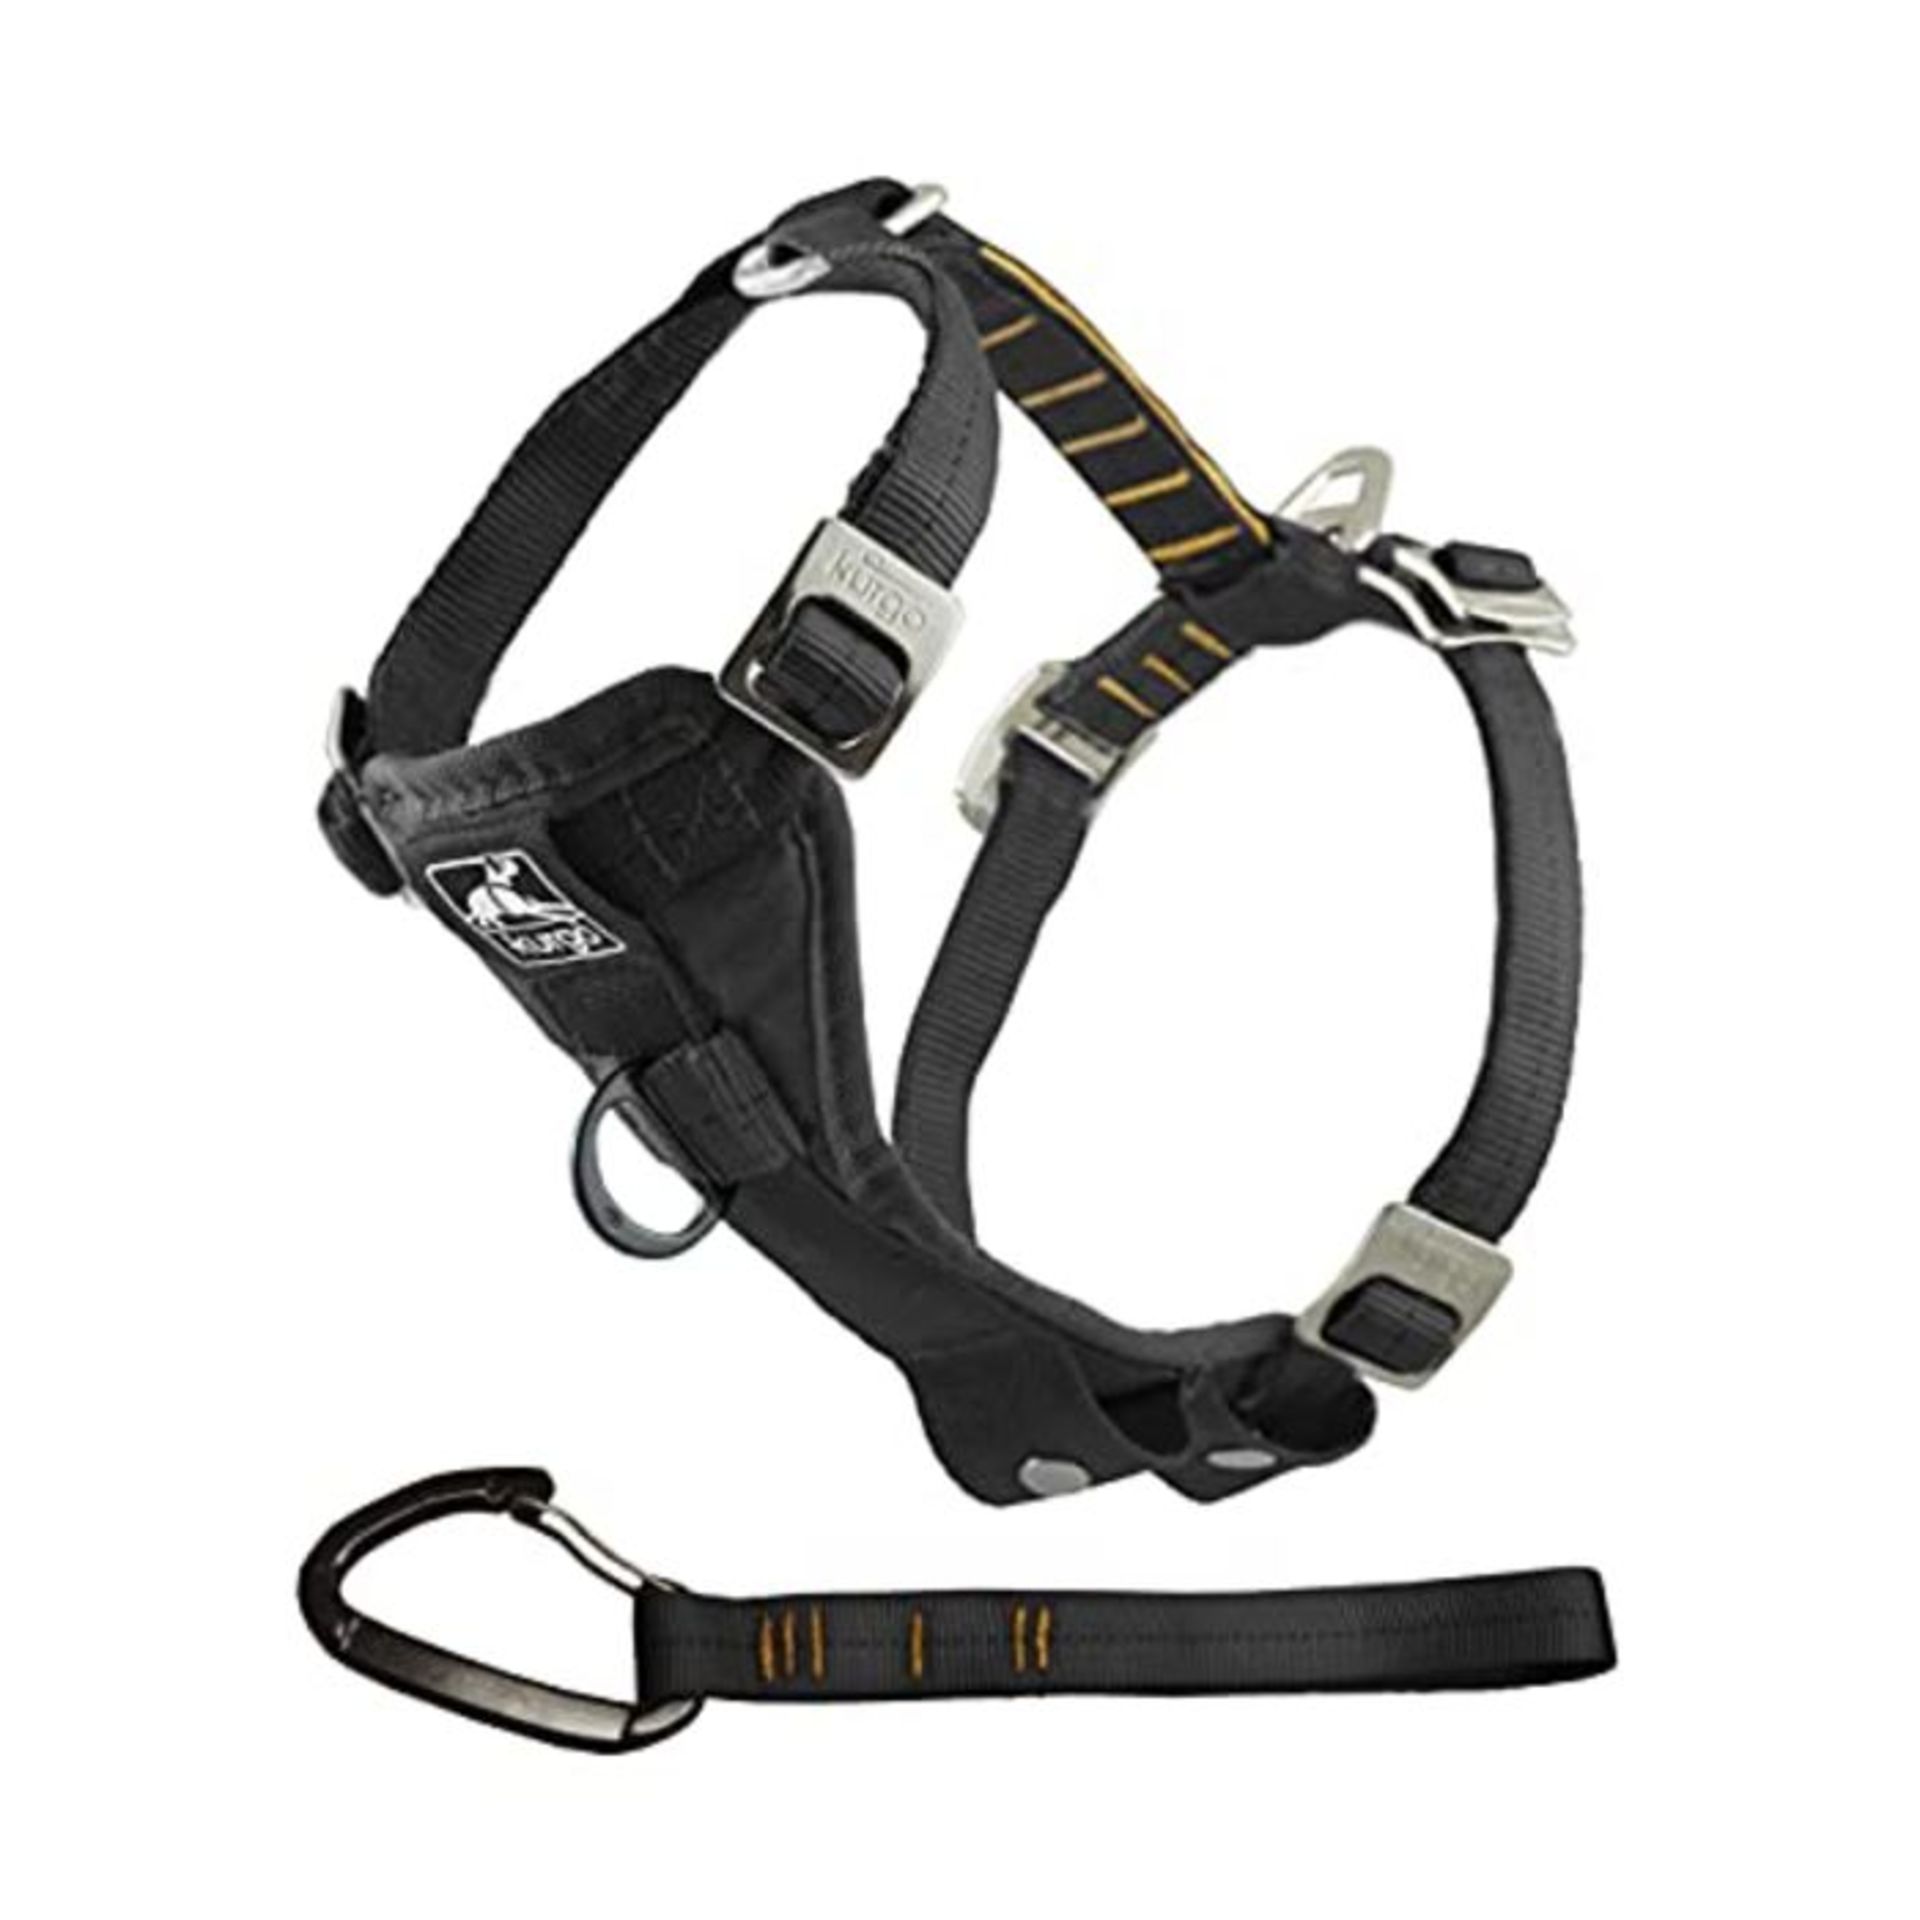 Kurgo Dog Harness, Car Harness for Dogs, Front D-Ring for No Pull Training, Includes D